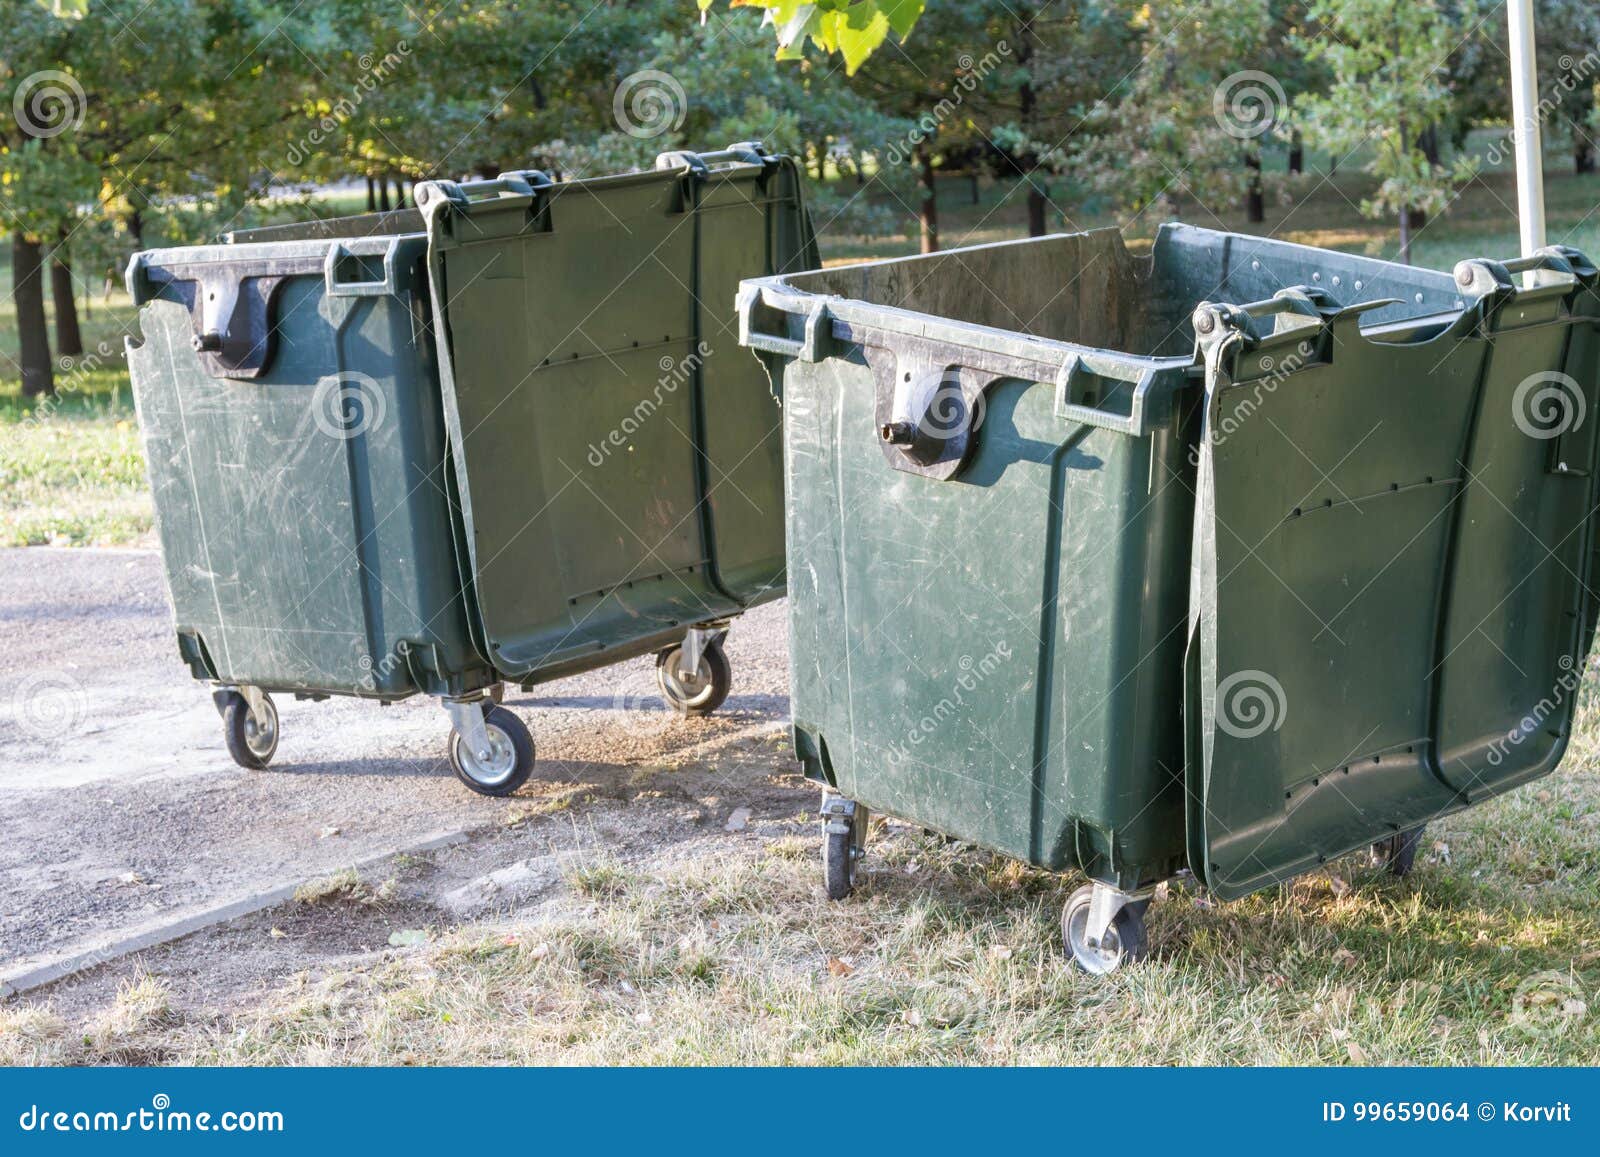 https://thumbs.dreamstime.com/z/large-garbage-cans-large-garbage-cans-green-color-wheels-99659064.jpg